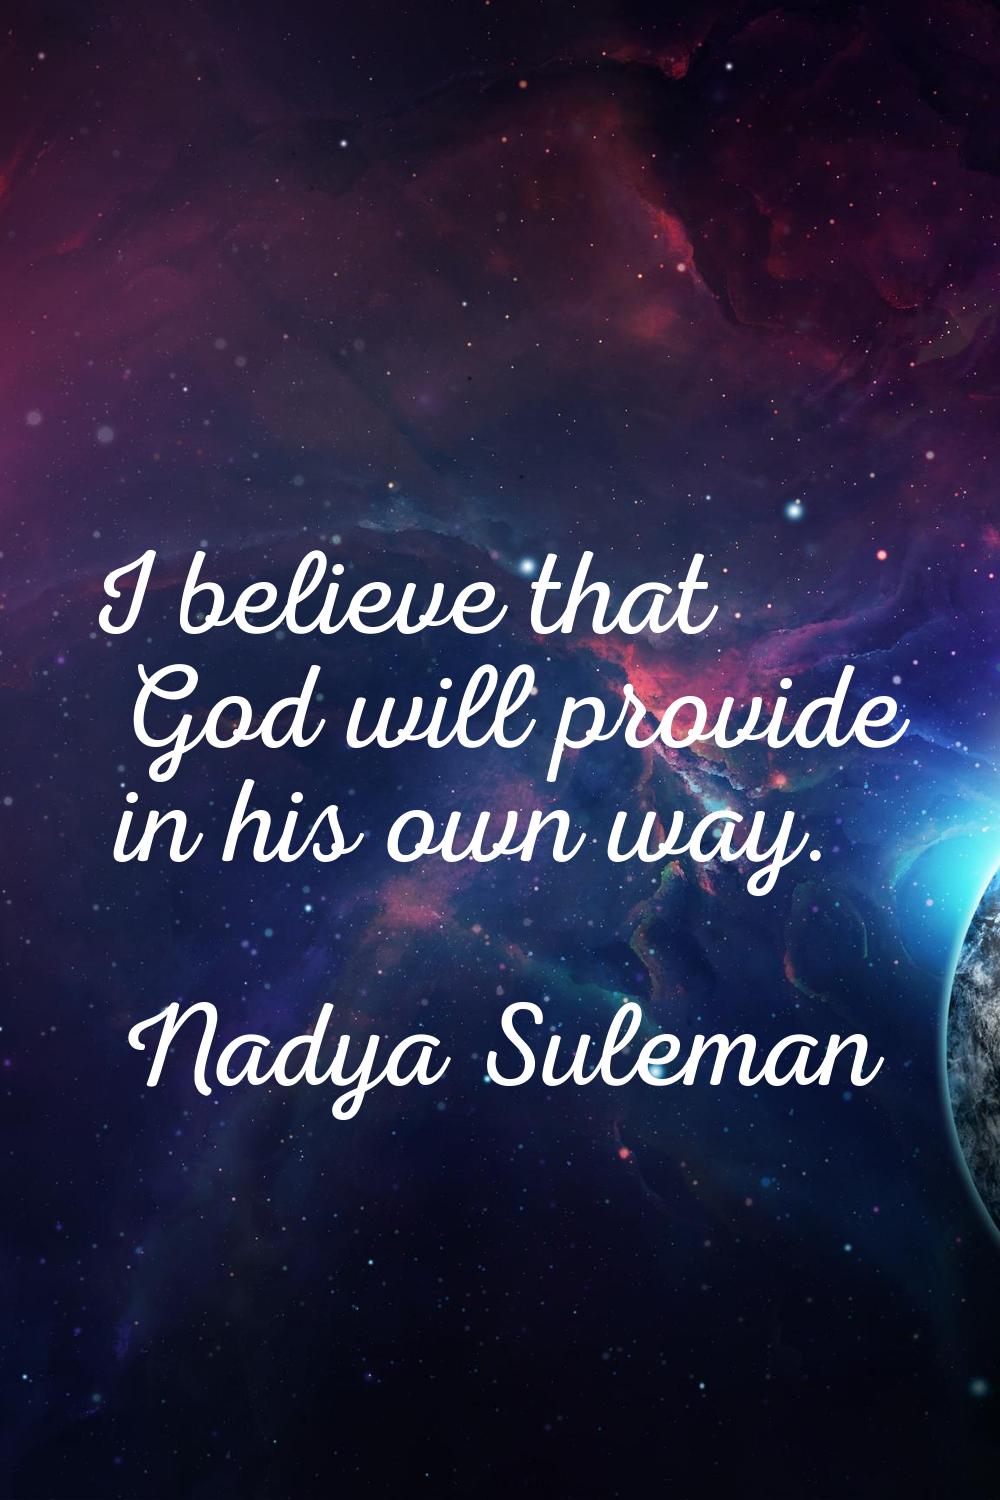 I believe that God will provide in his own way.